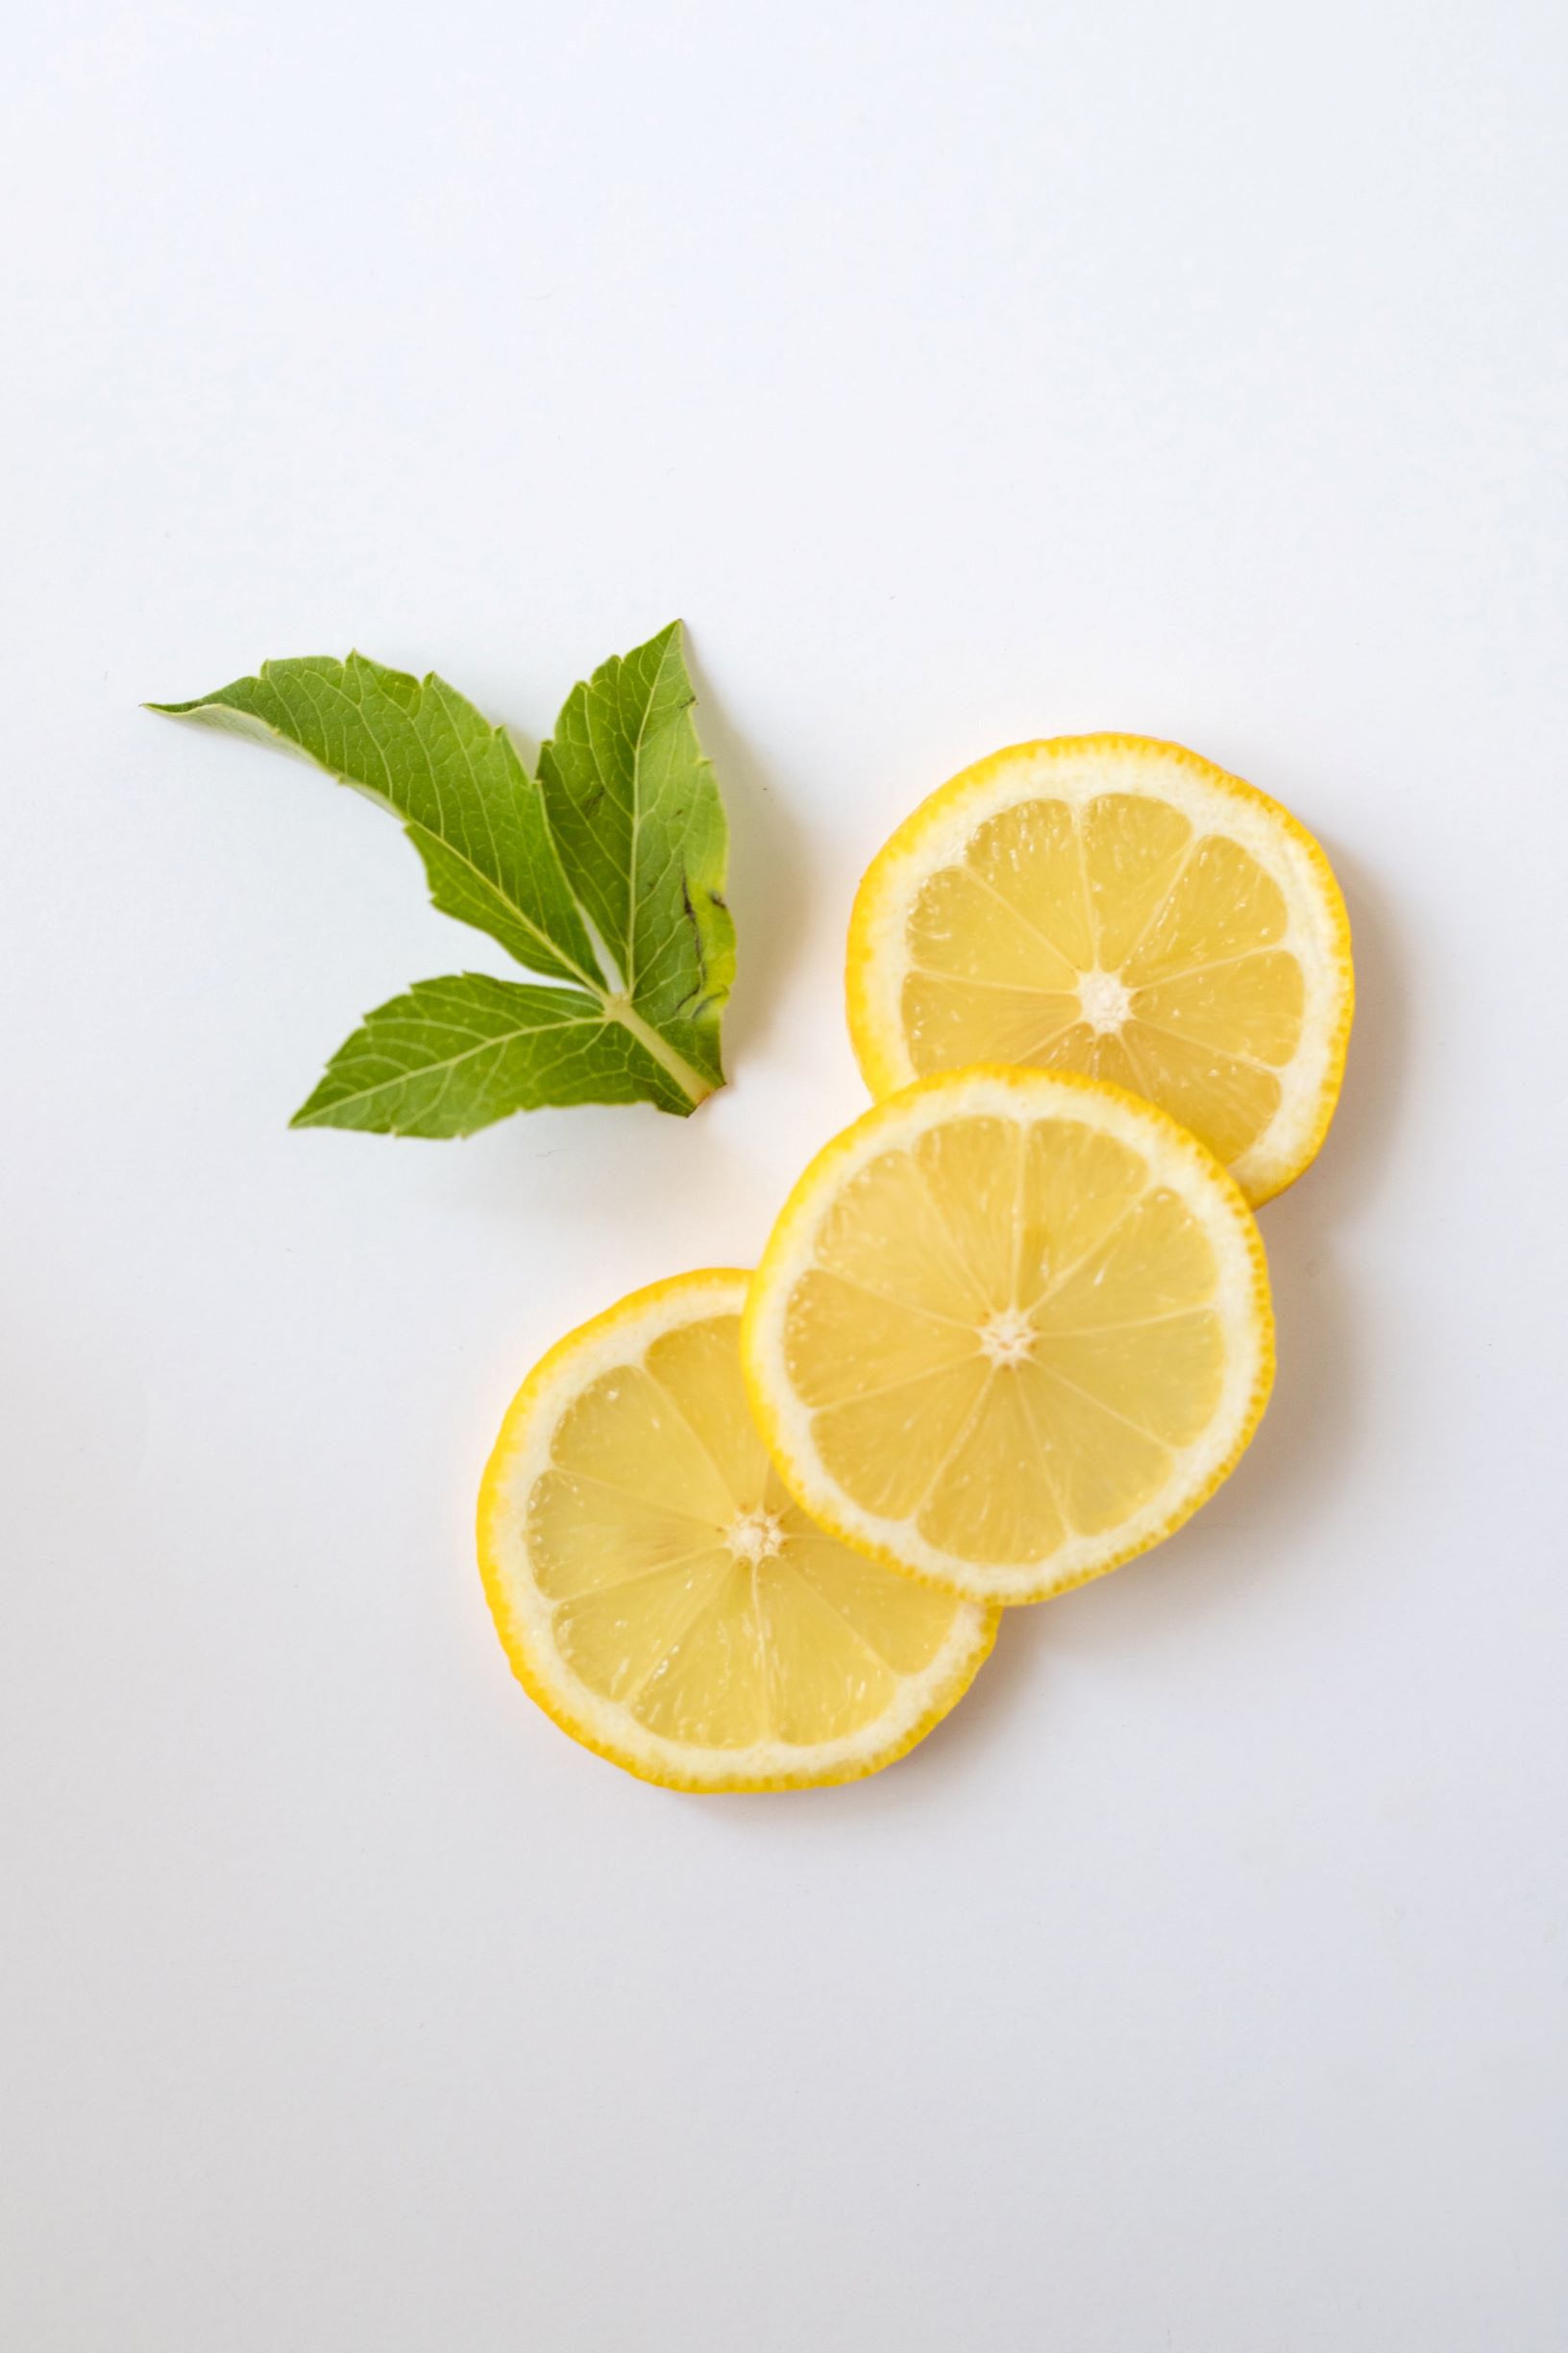 Lemon Essential Oil For Cleaning with Recipes - #1 Fan Favorite